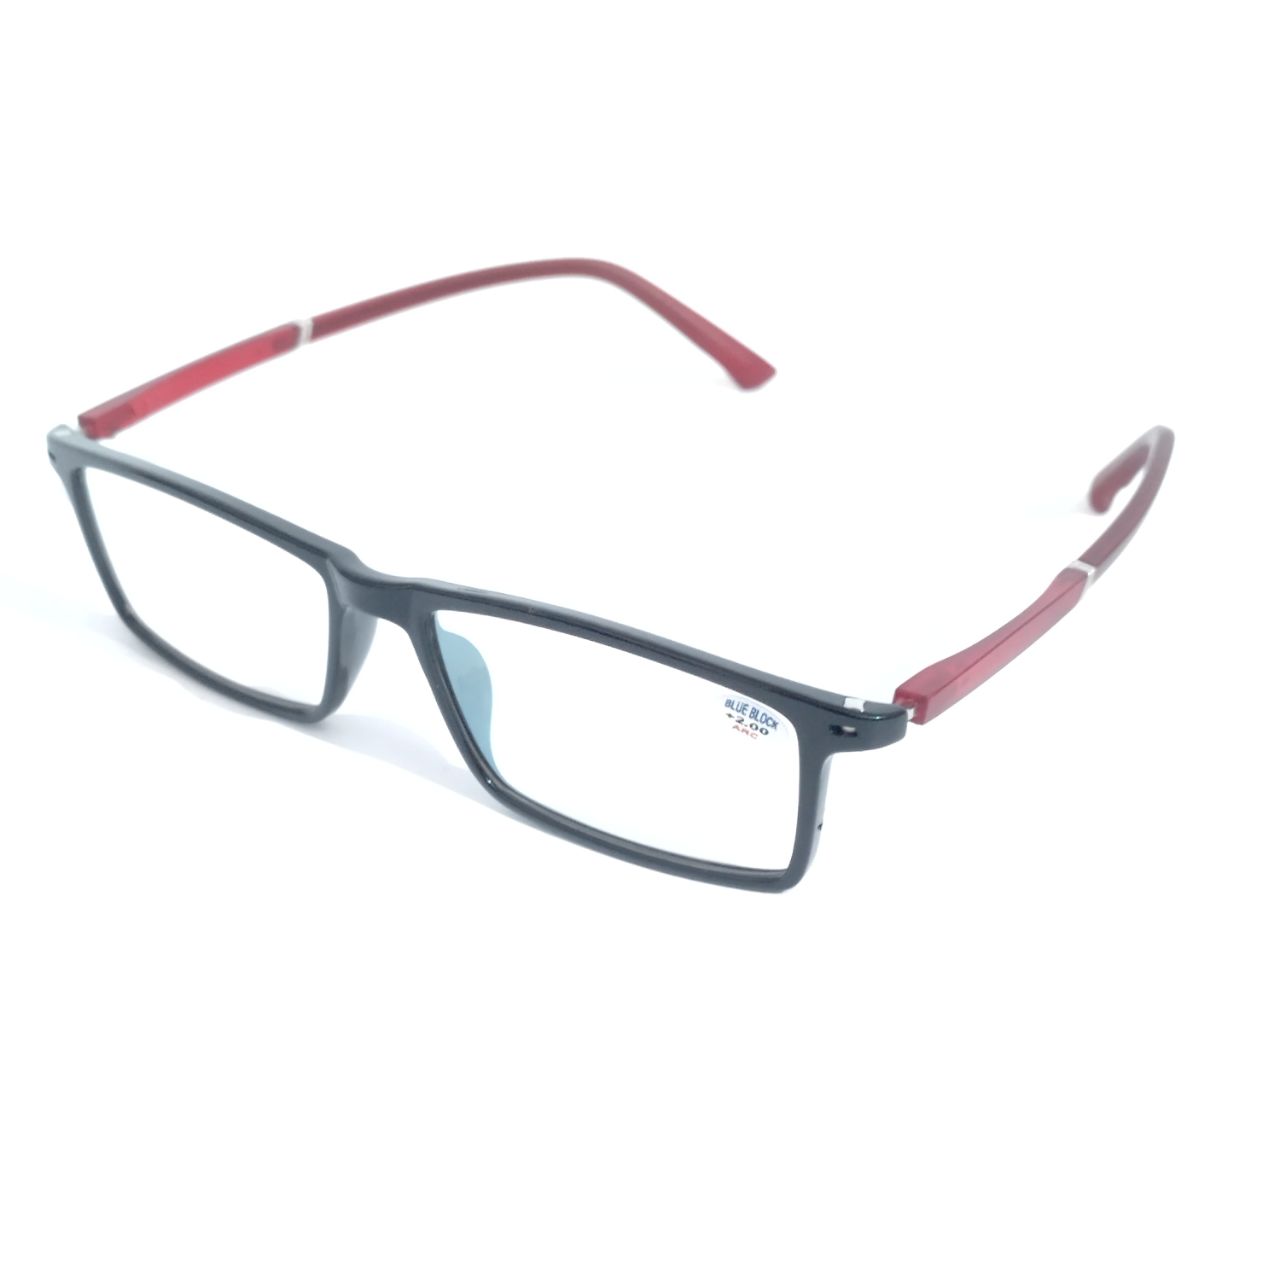 Plus Two +2.00 Reading Power Anti Glare Computer Reading Glassee